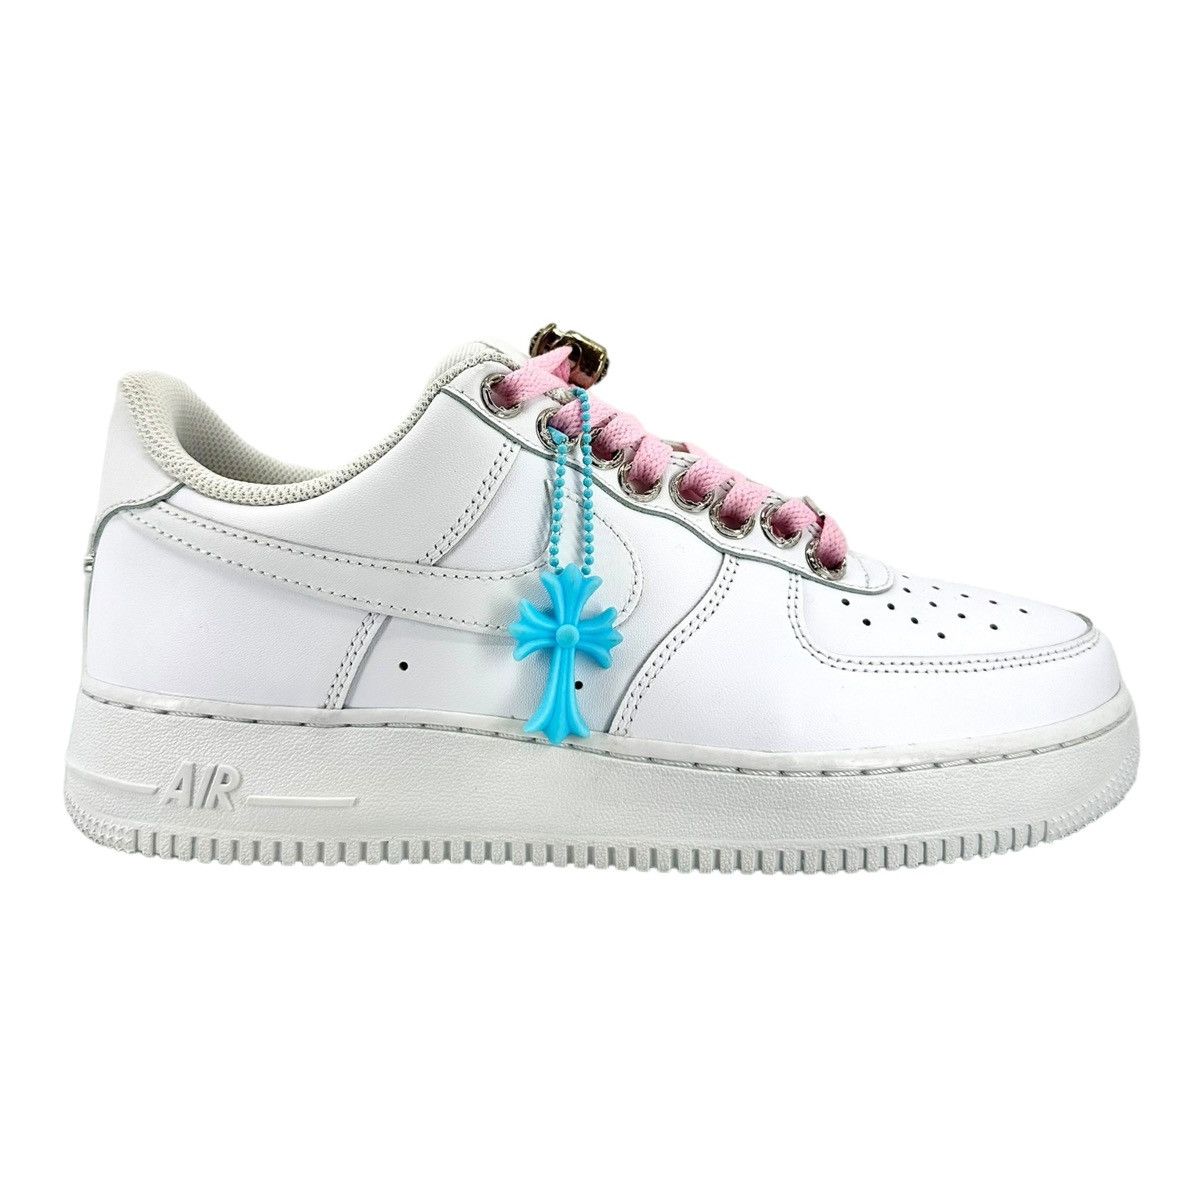 Pre-owned Chrome Hearts X Nike Air Force 1 '07 Low White (chrome Hearts Clb) Shoes